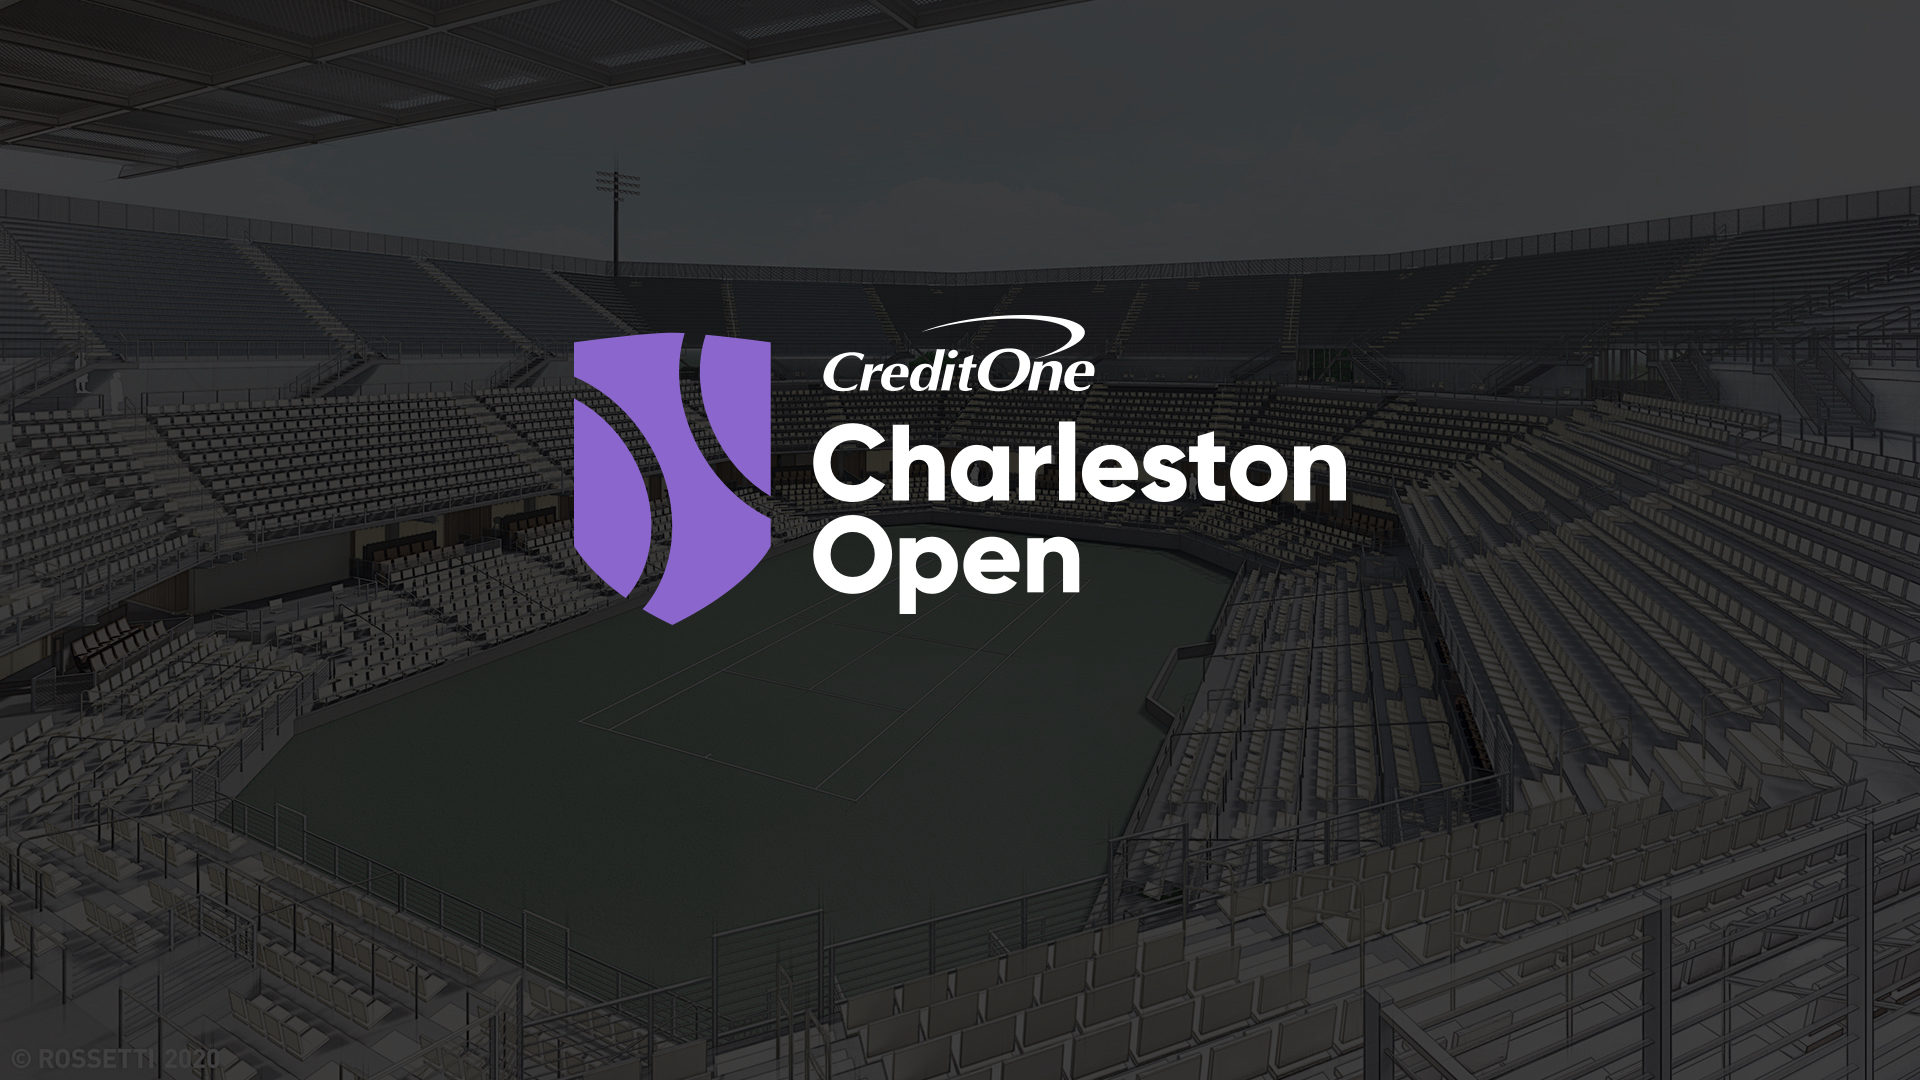 UNVEILING THE CREDIT ONE CHARLESTON OPEN